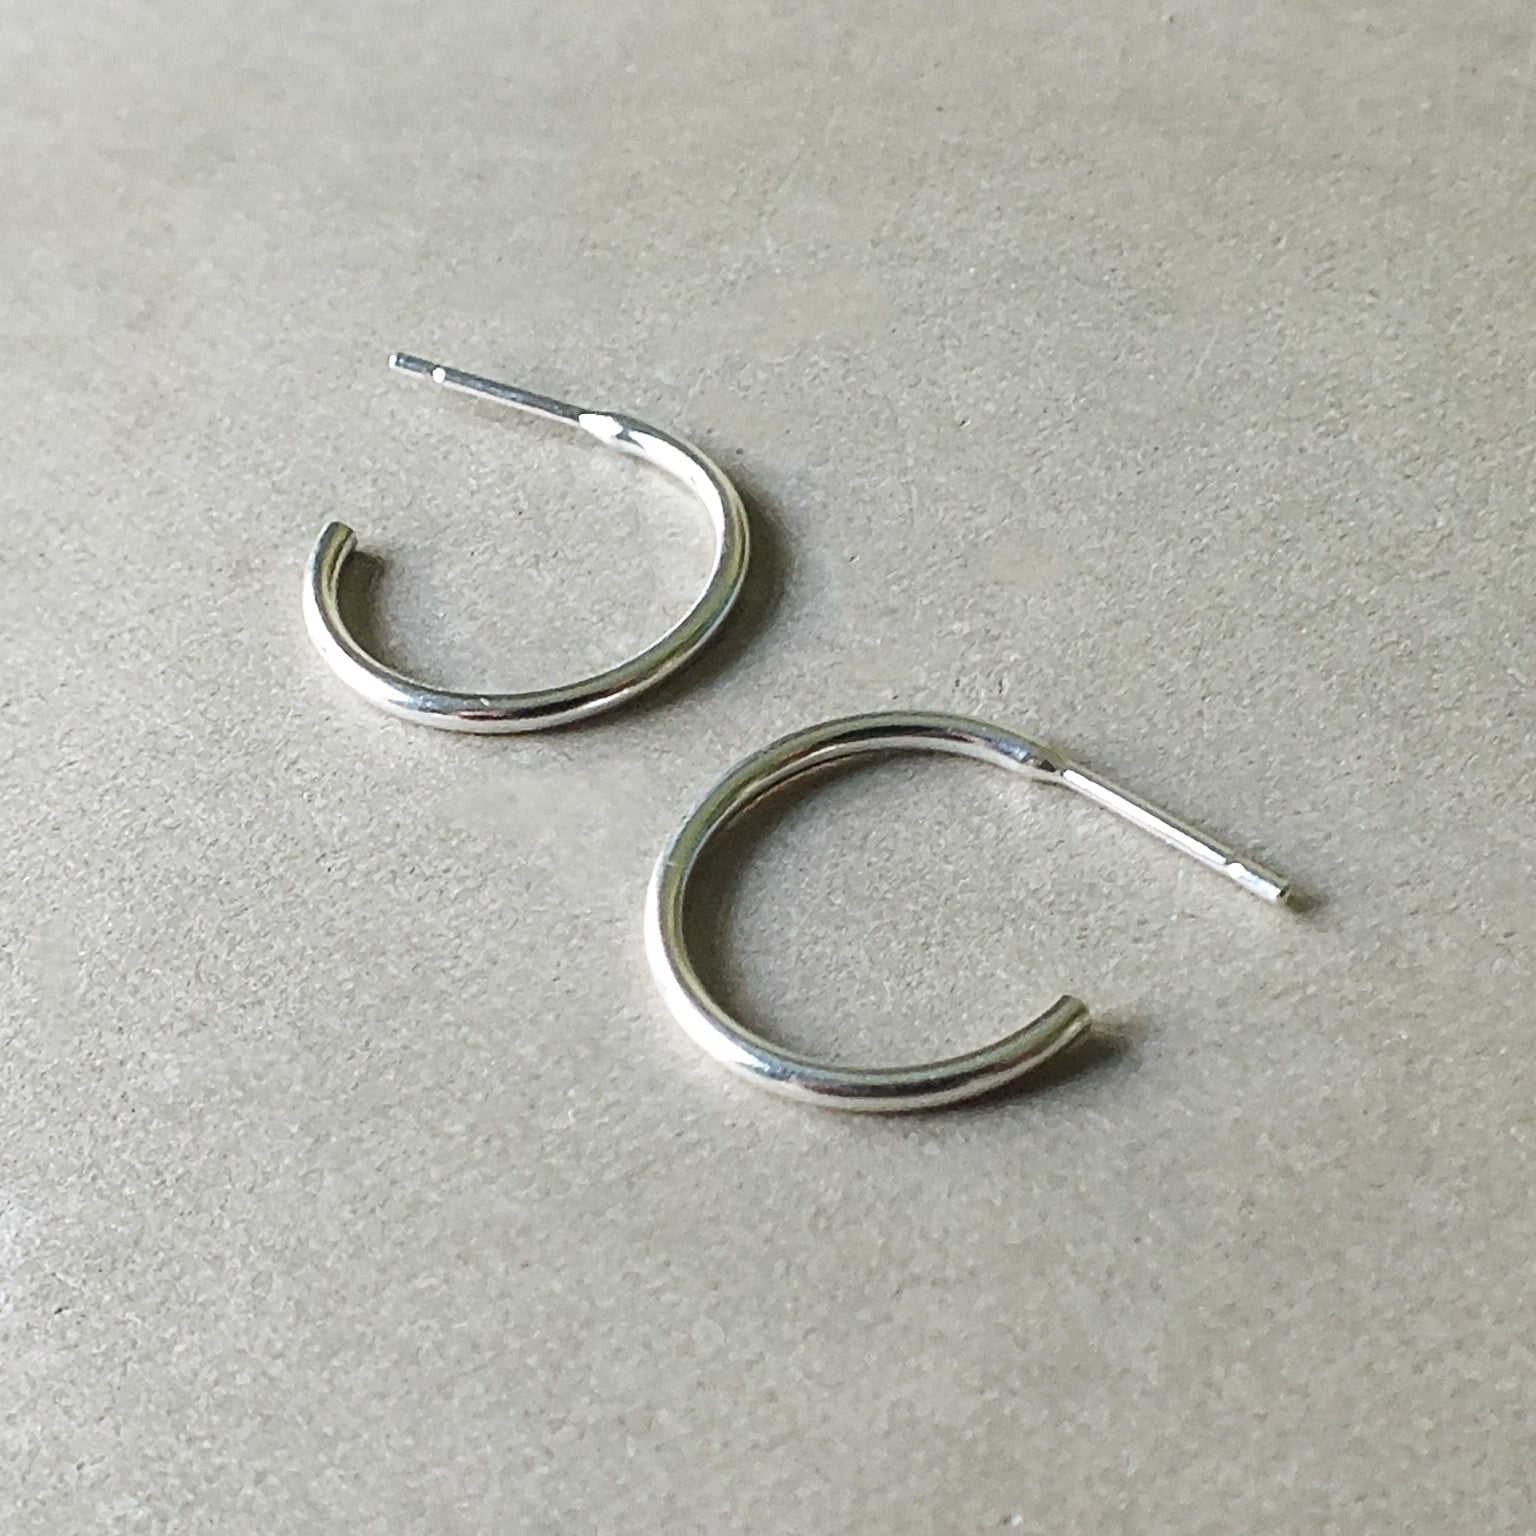 Two Becoming Jewelry medium Open Hoop Earrings in sterling silver on a gray surface.